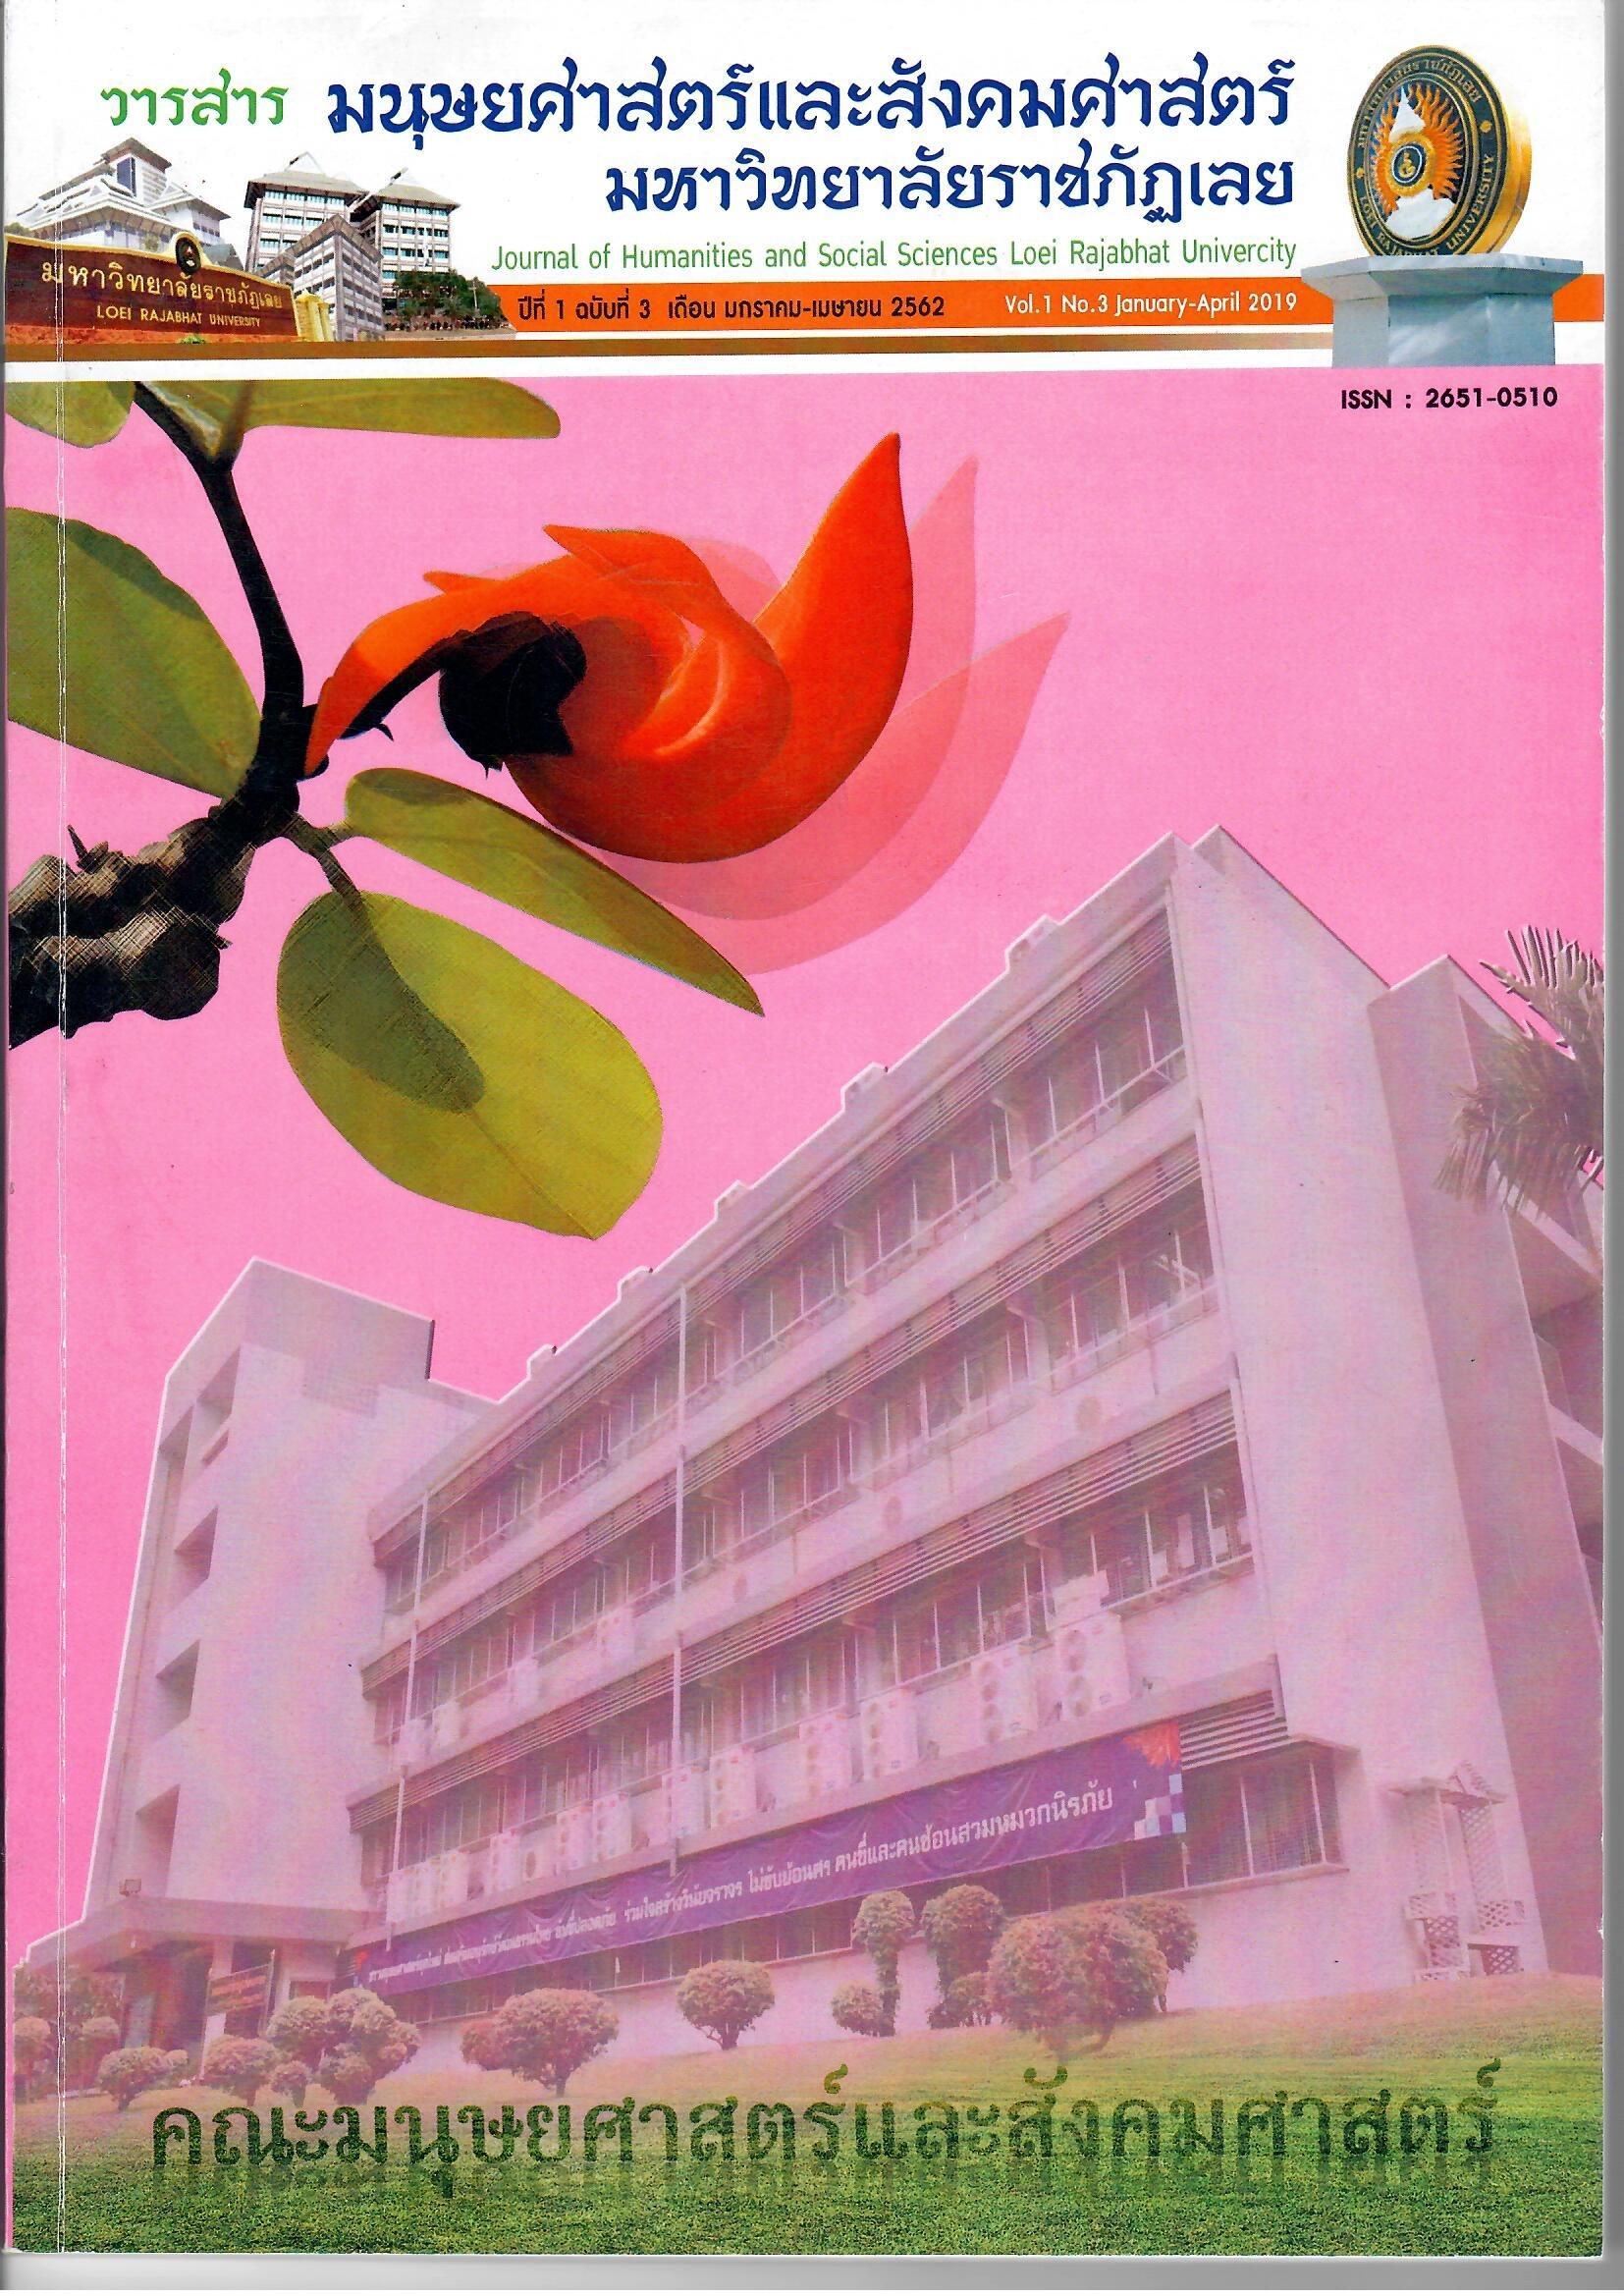 					View Vol. 1 No. 3 (2562): Journal of Humanities and Social Sciences Loei Rajabhat University Vol. 1 No. 3 January – April 2018
				